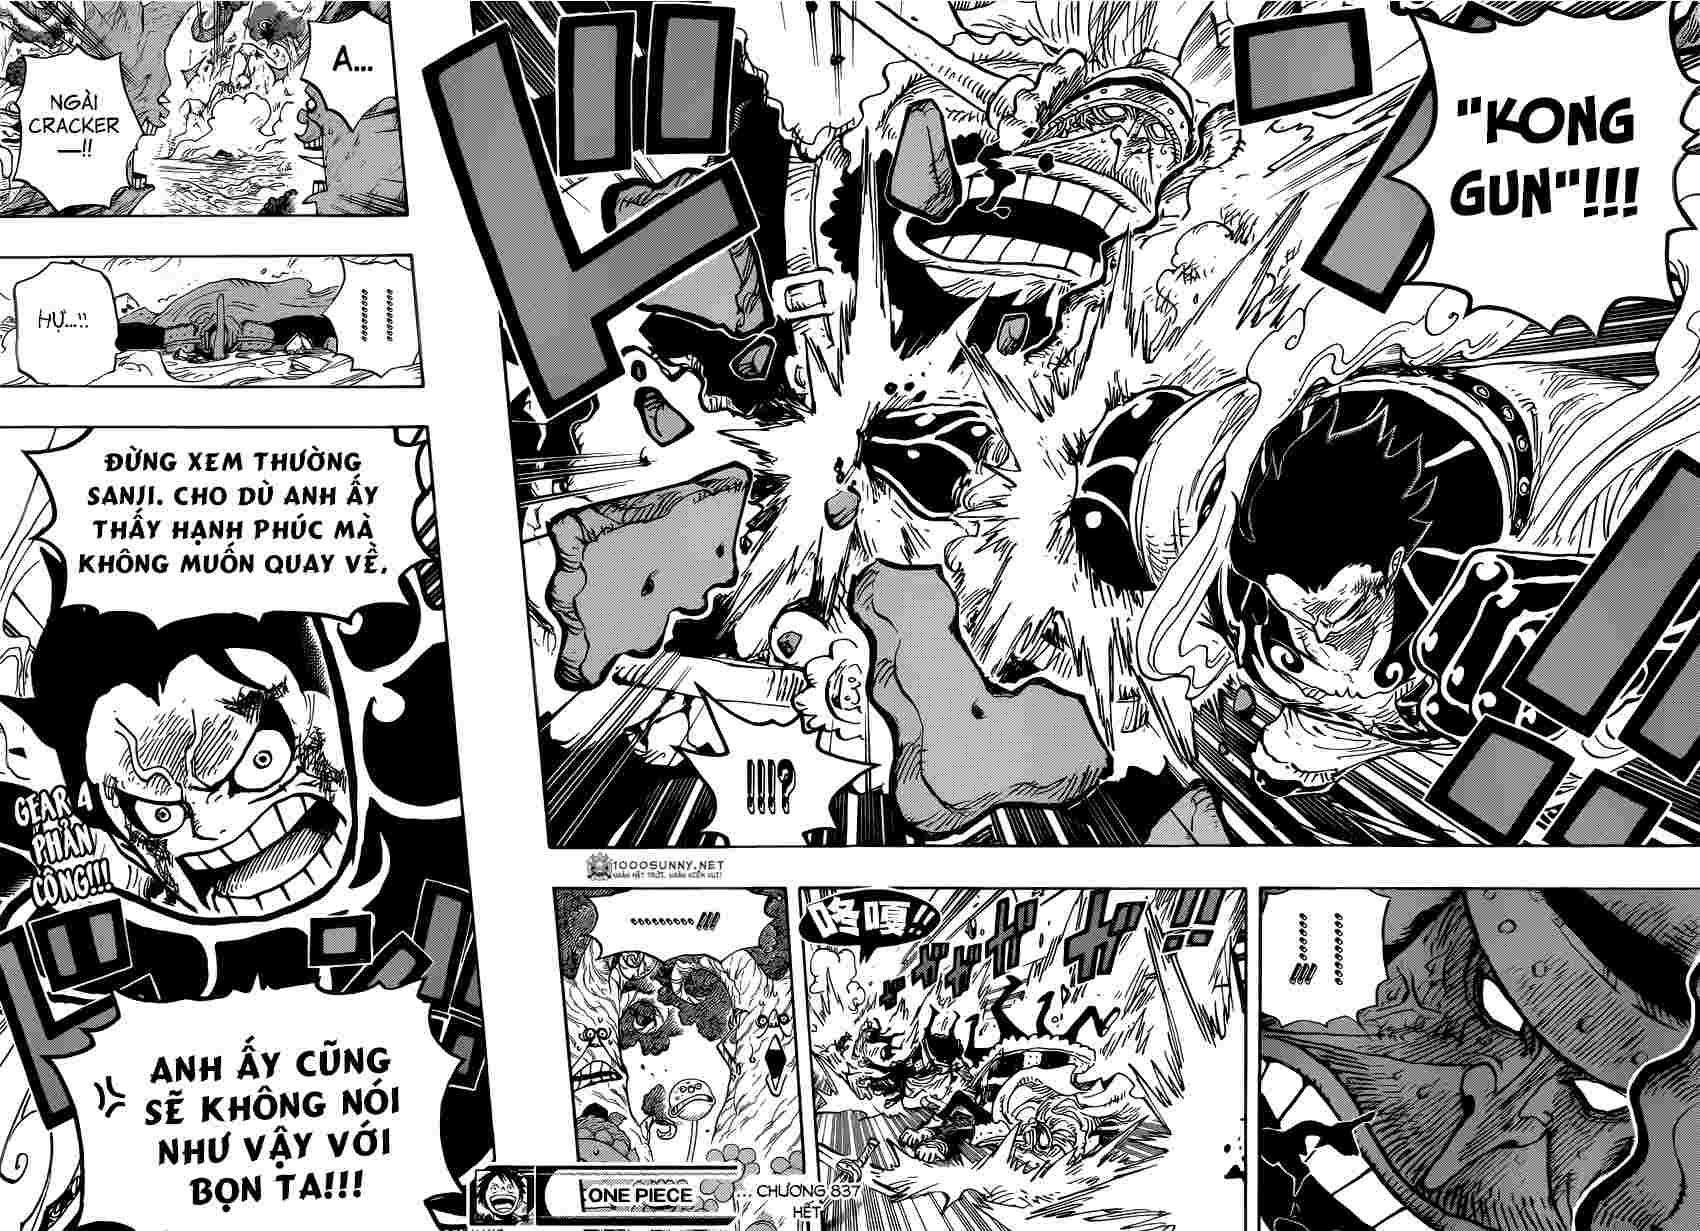 One Piece Chapter 837: Luffy vs Chỉ huy Cracker!!! 16-1711